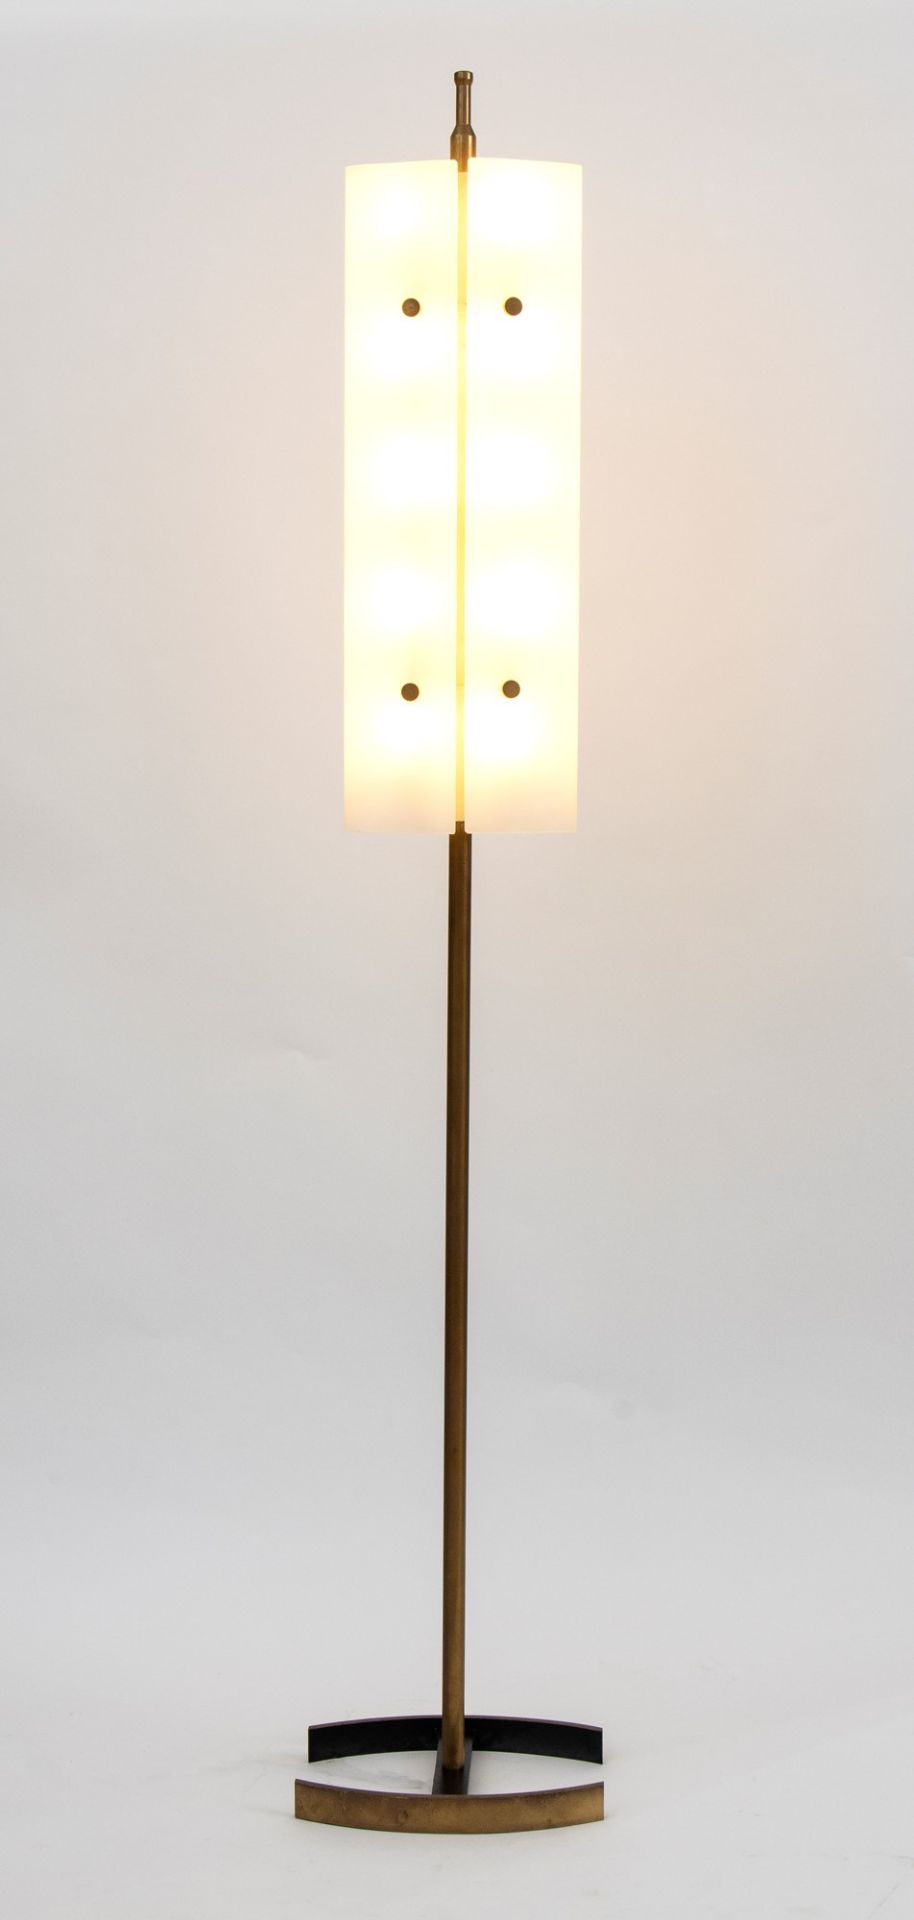 Angelo Lelli Ancona 1915-Monza 1979 Floor lamp mod. 12707 in brass and opal glass diffusers - Bild 5 aus 15